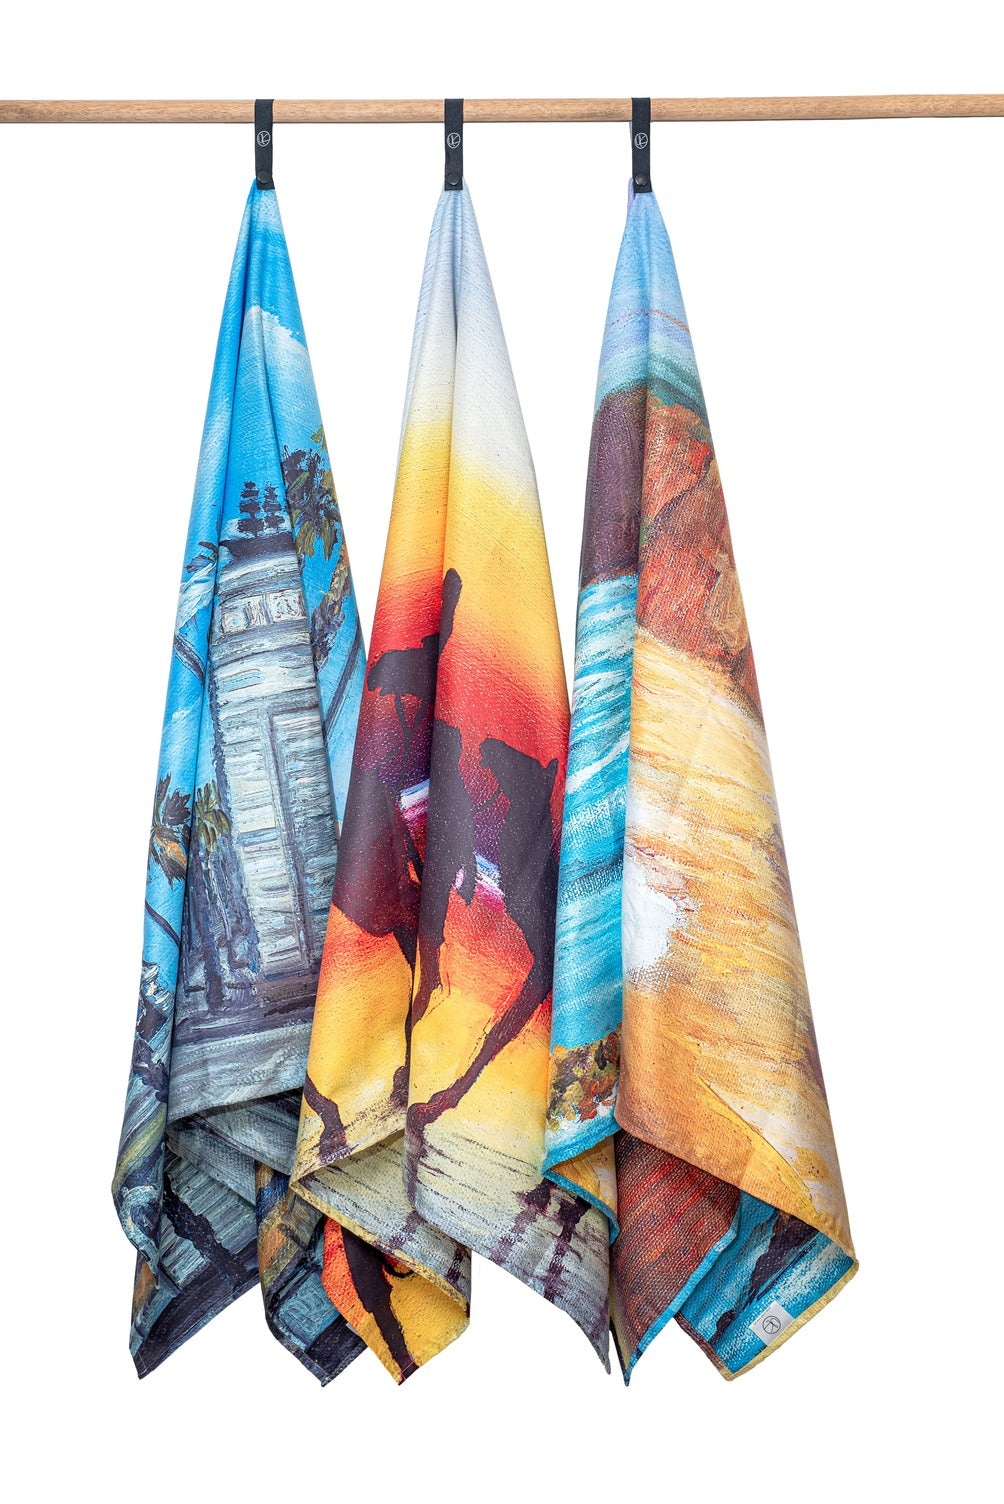 Glenelg, Broome and 12 Apostles Microfibre Artistic Towel. Large size, 170cm x 95cm, soft touch, compact and sand free beach towel. An Aussie-inspired art showcasing magnificent landmarks and the Aussie lifestyle.